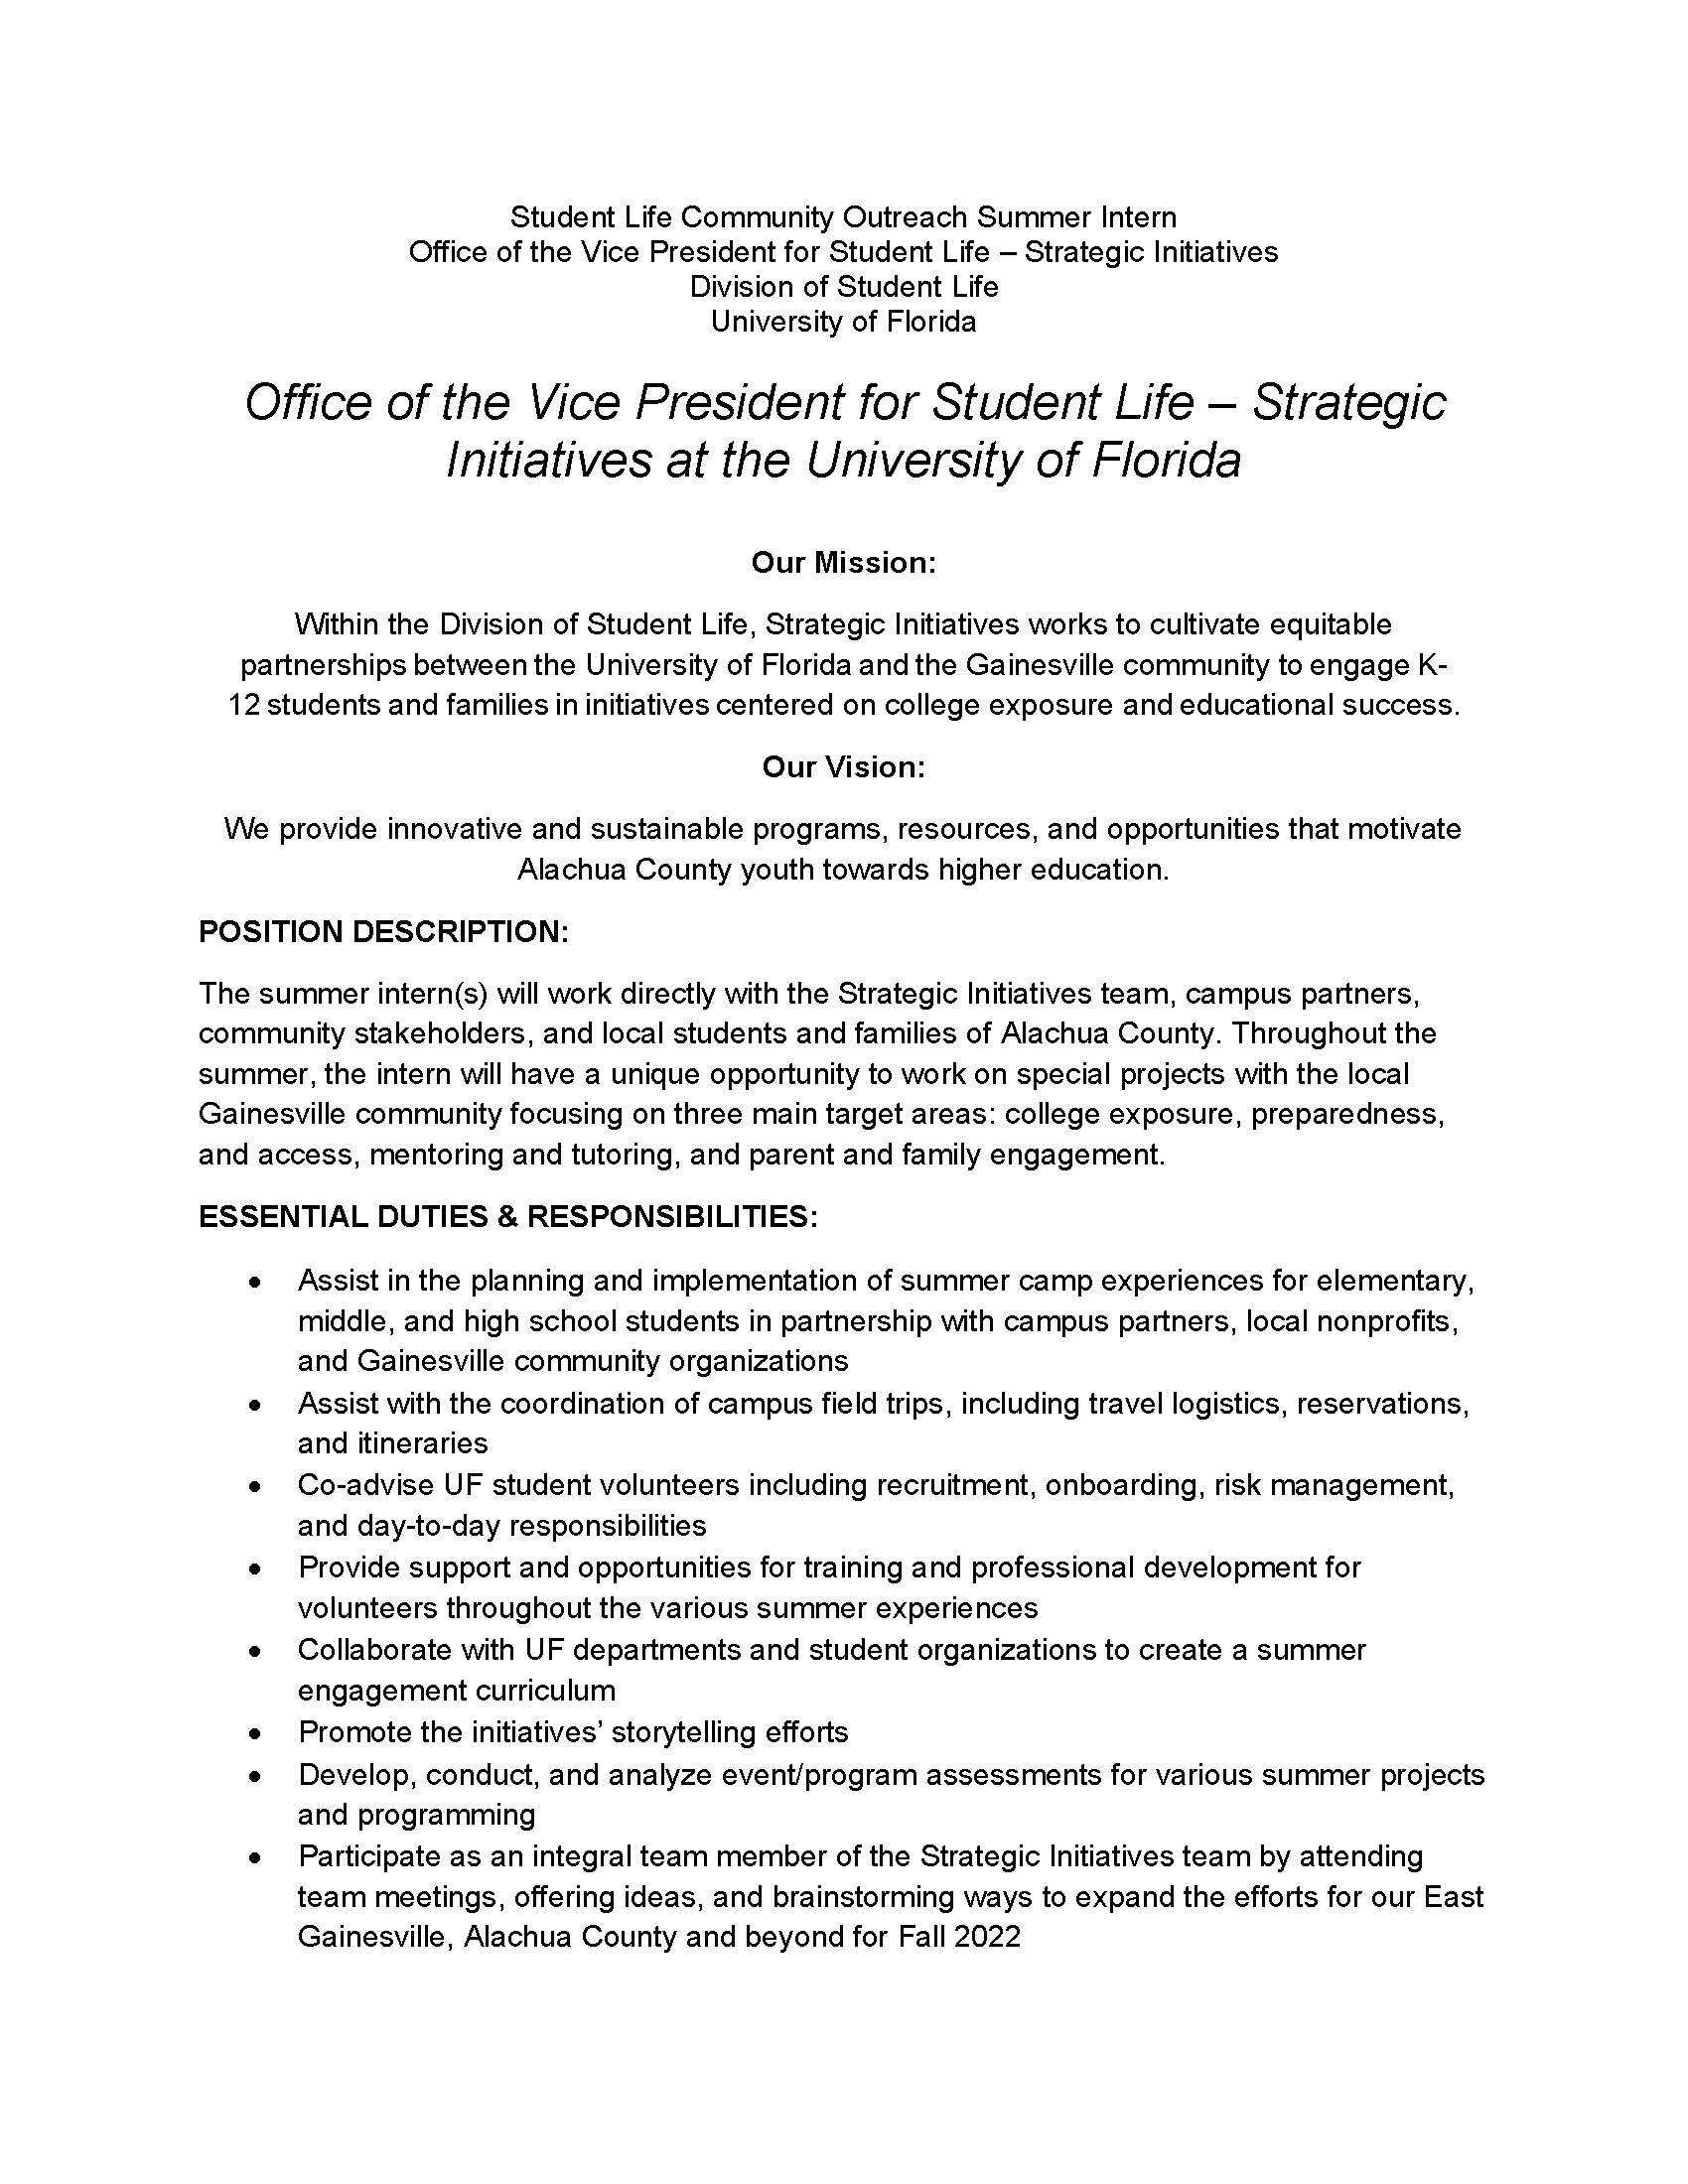 Strategic Initiatives from the Office of the Vice President for Student Life